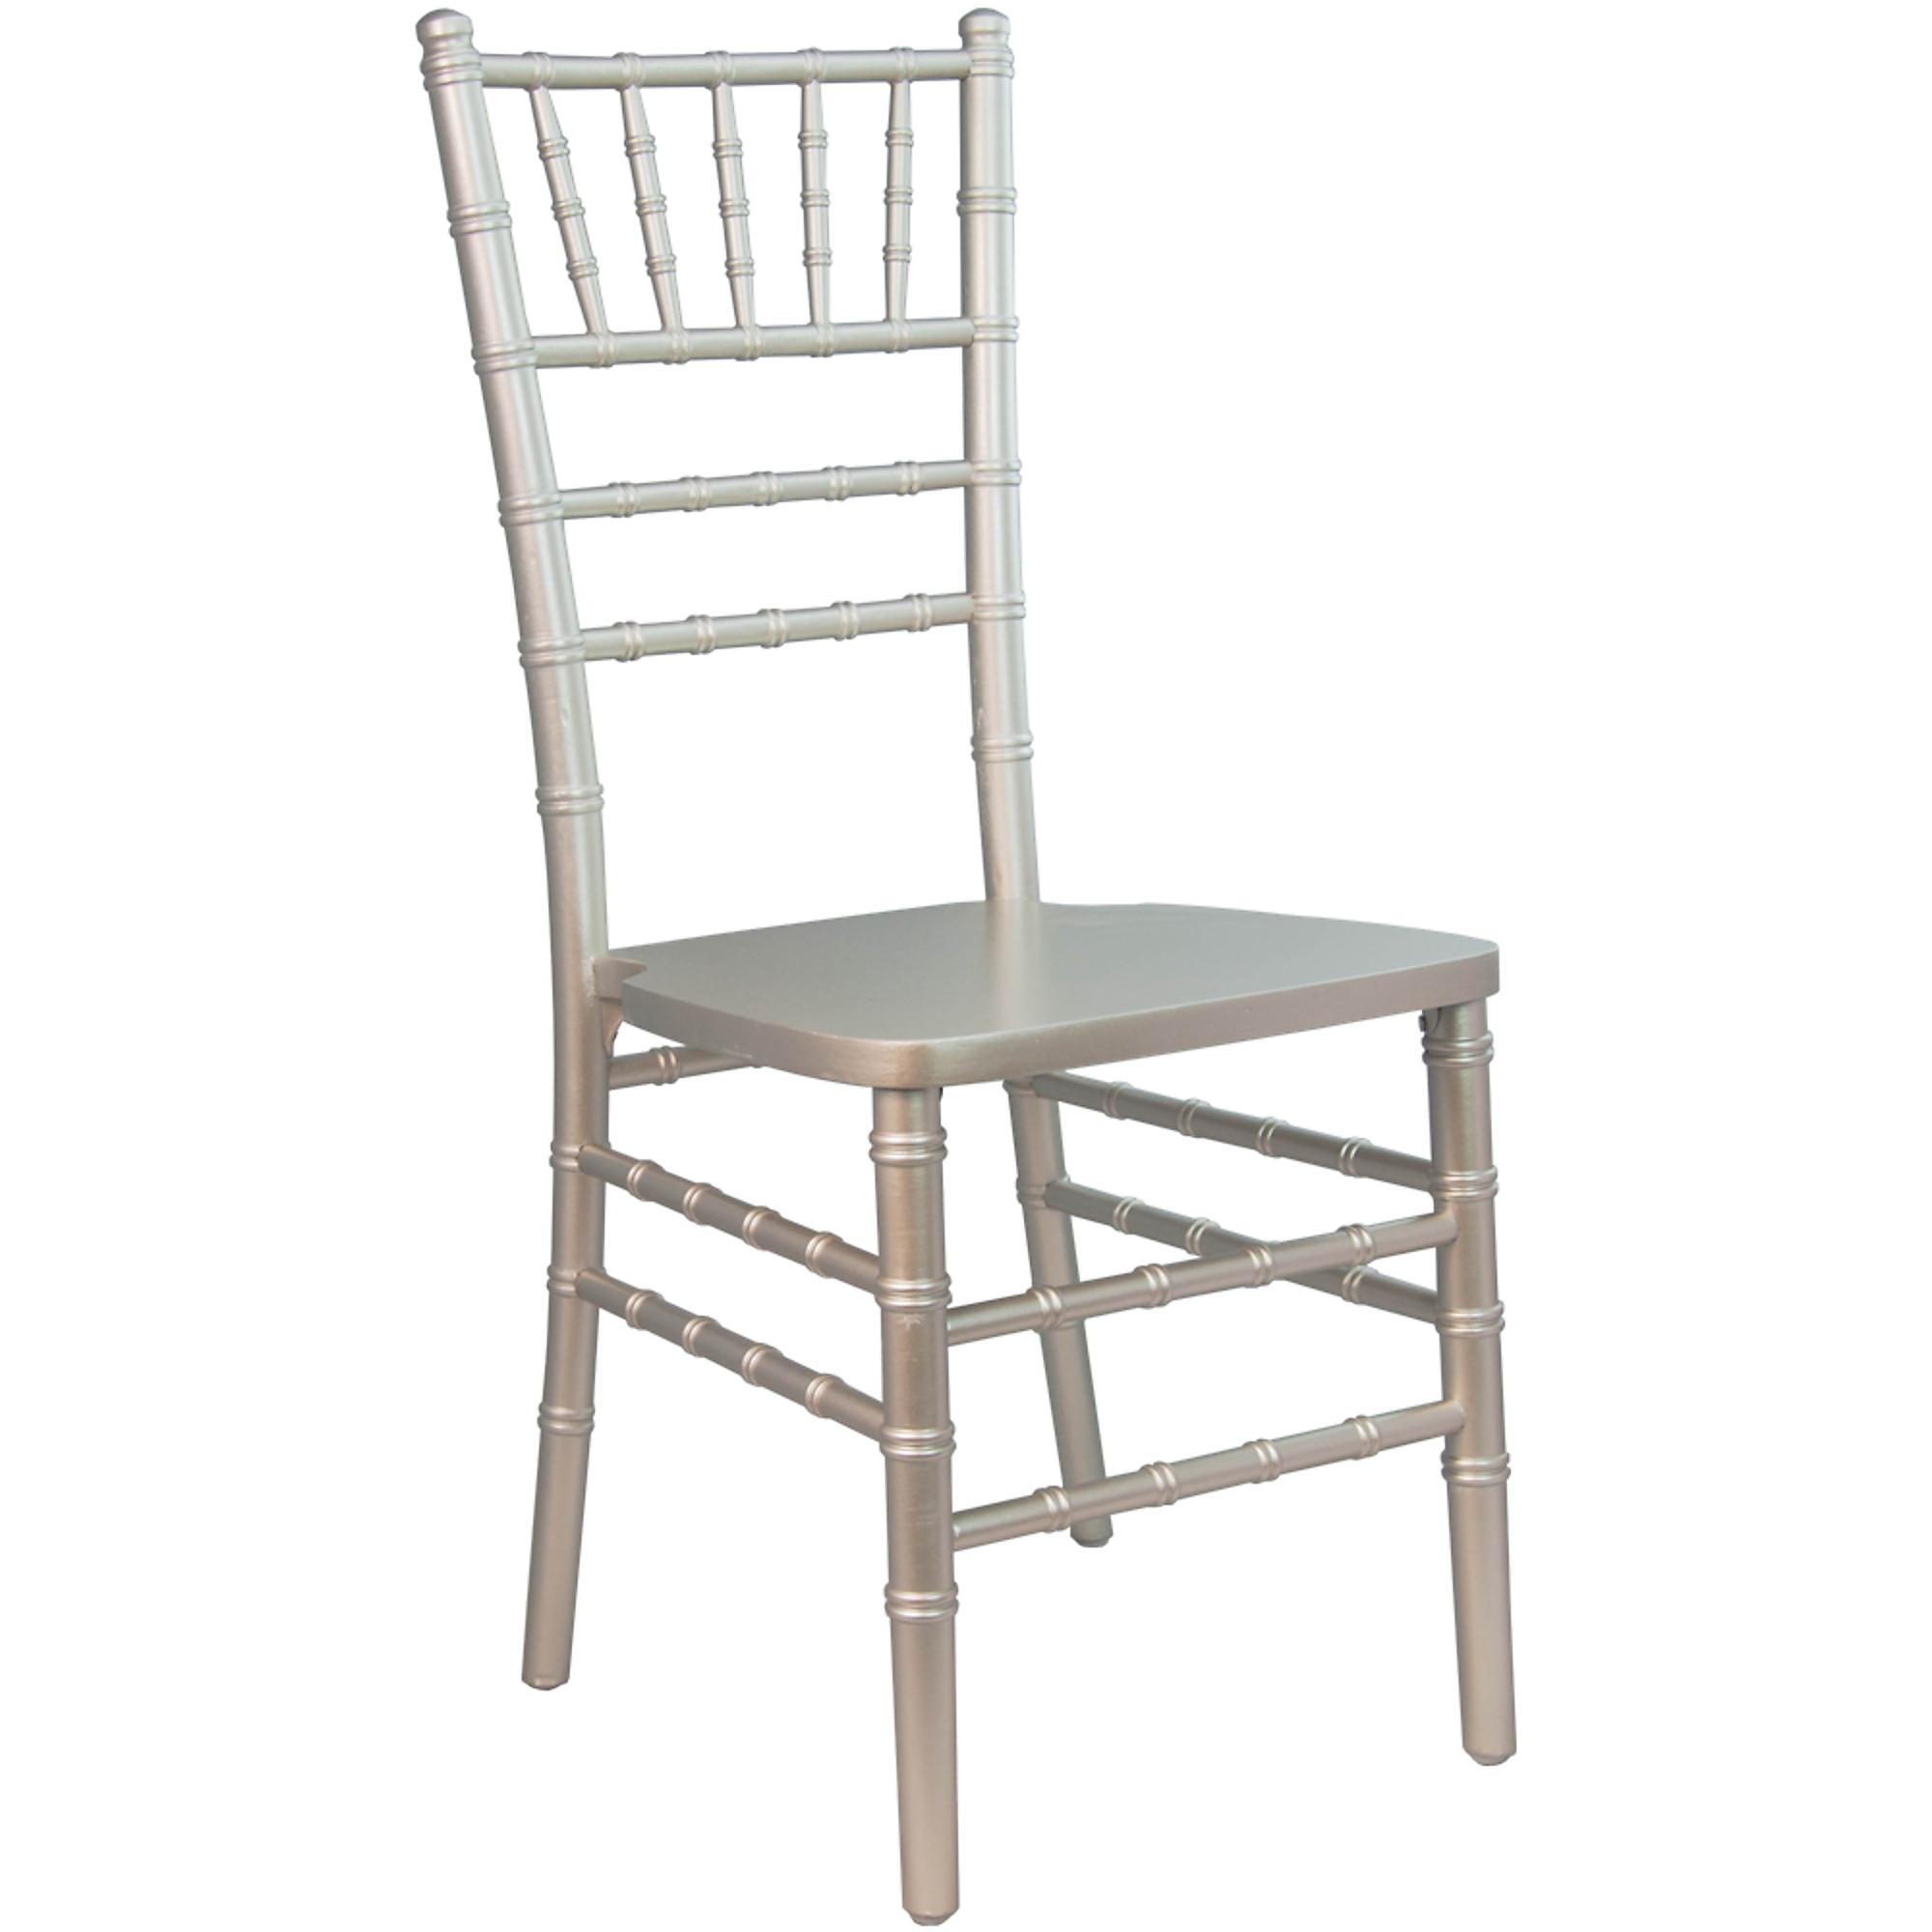 Flash Furniture, Champagne Wood Chiavari Chair, Primary Color Gray, Included (qty.) 1, Model WDCHIC